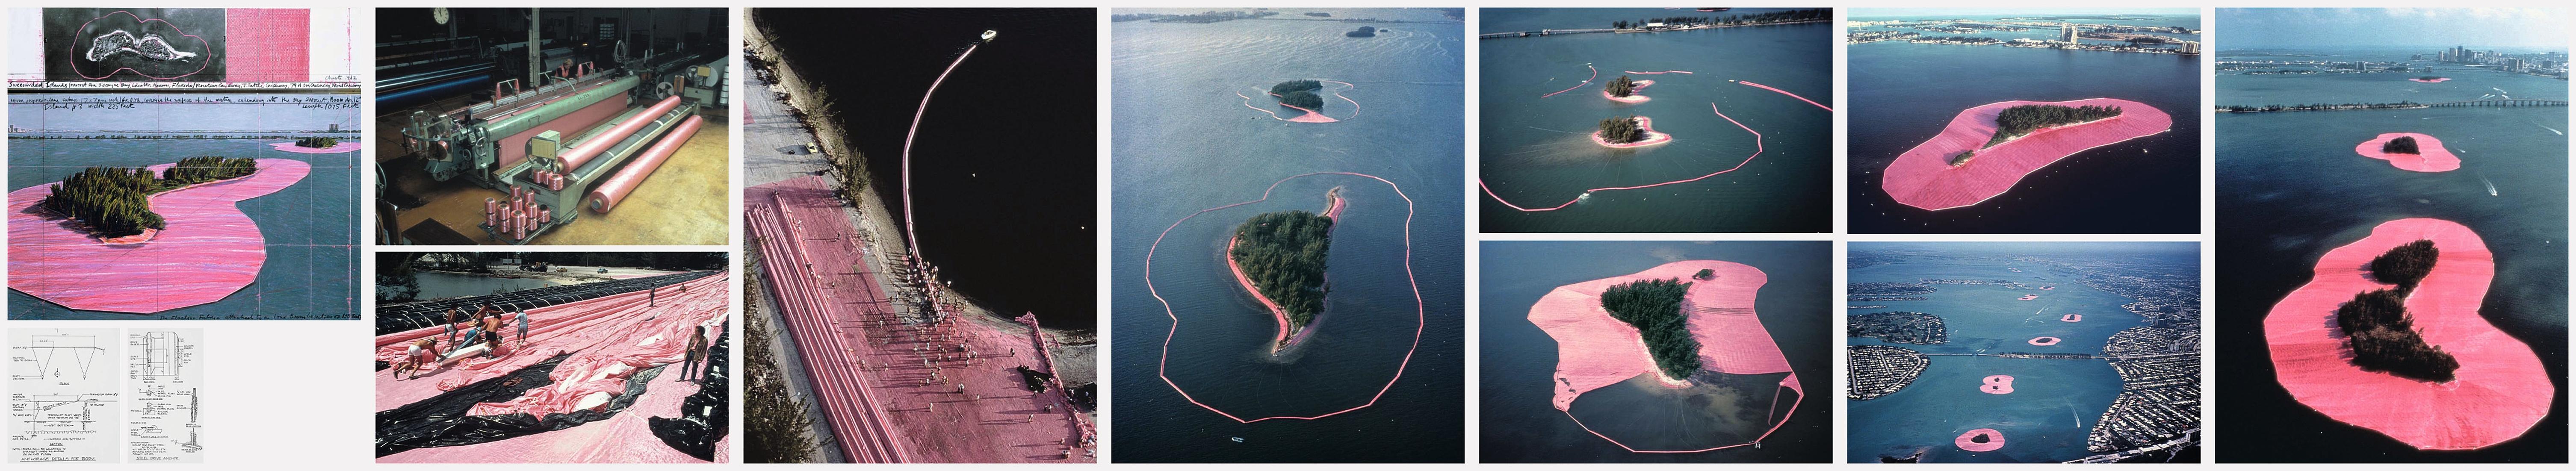 Christo and Jeanne-Claude
Surrounded Islands, 1980 - 83, 2009
Medium: 7-part leporello, digital pigment print (Ditone) on 260 g Hahnemühle Baryta paper
Dimensions: 32 x 175 cm (12½ x 69 in)
Edition of 75: Hand-signed and numbered
Condition: Mint